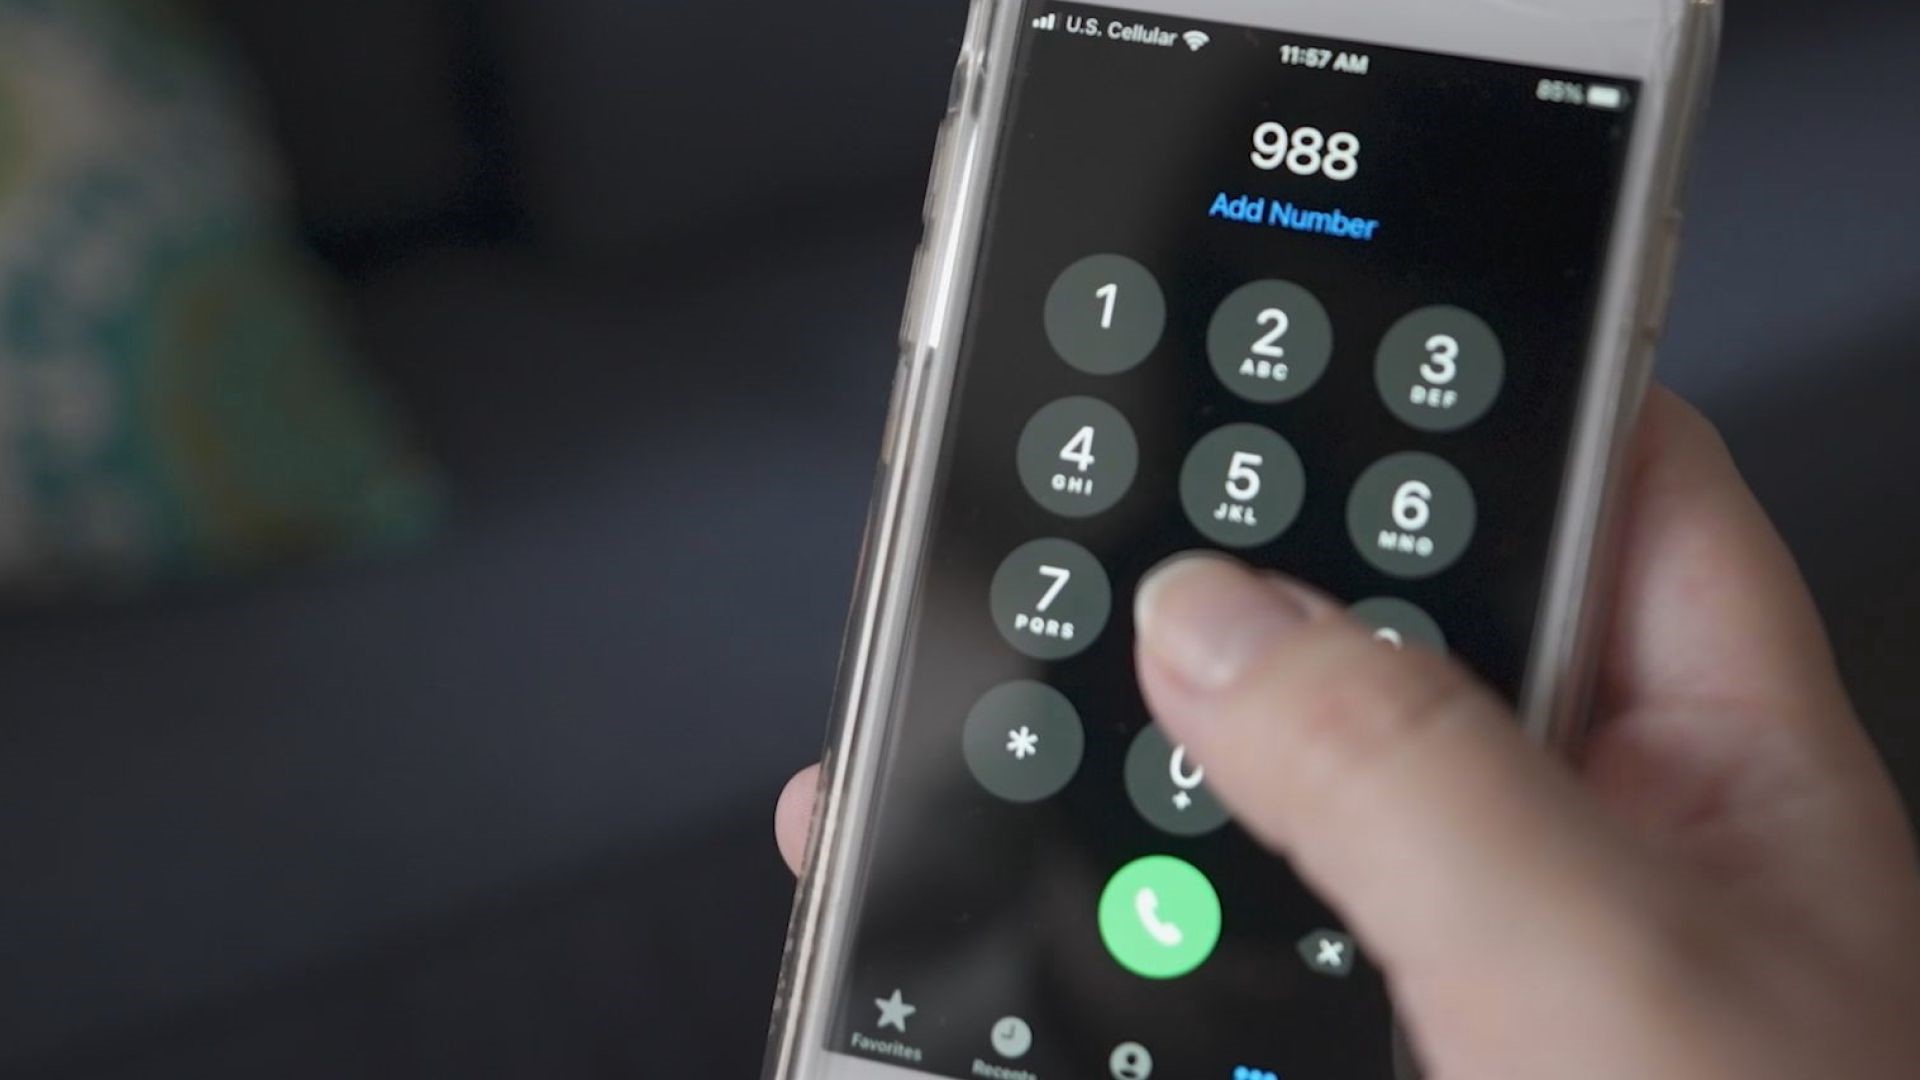 Since the rollout of the 988 number, people calling from cellphones with out-of-state numbers do not get the Maine Crisis Line. Officials are working to fix that.